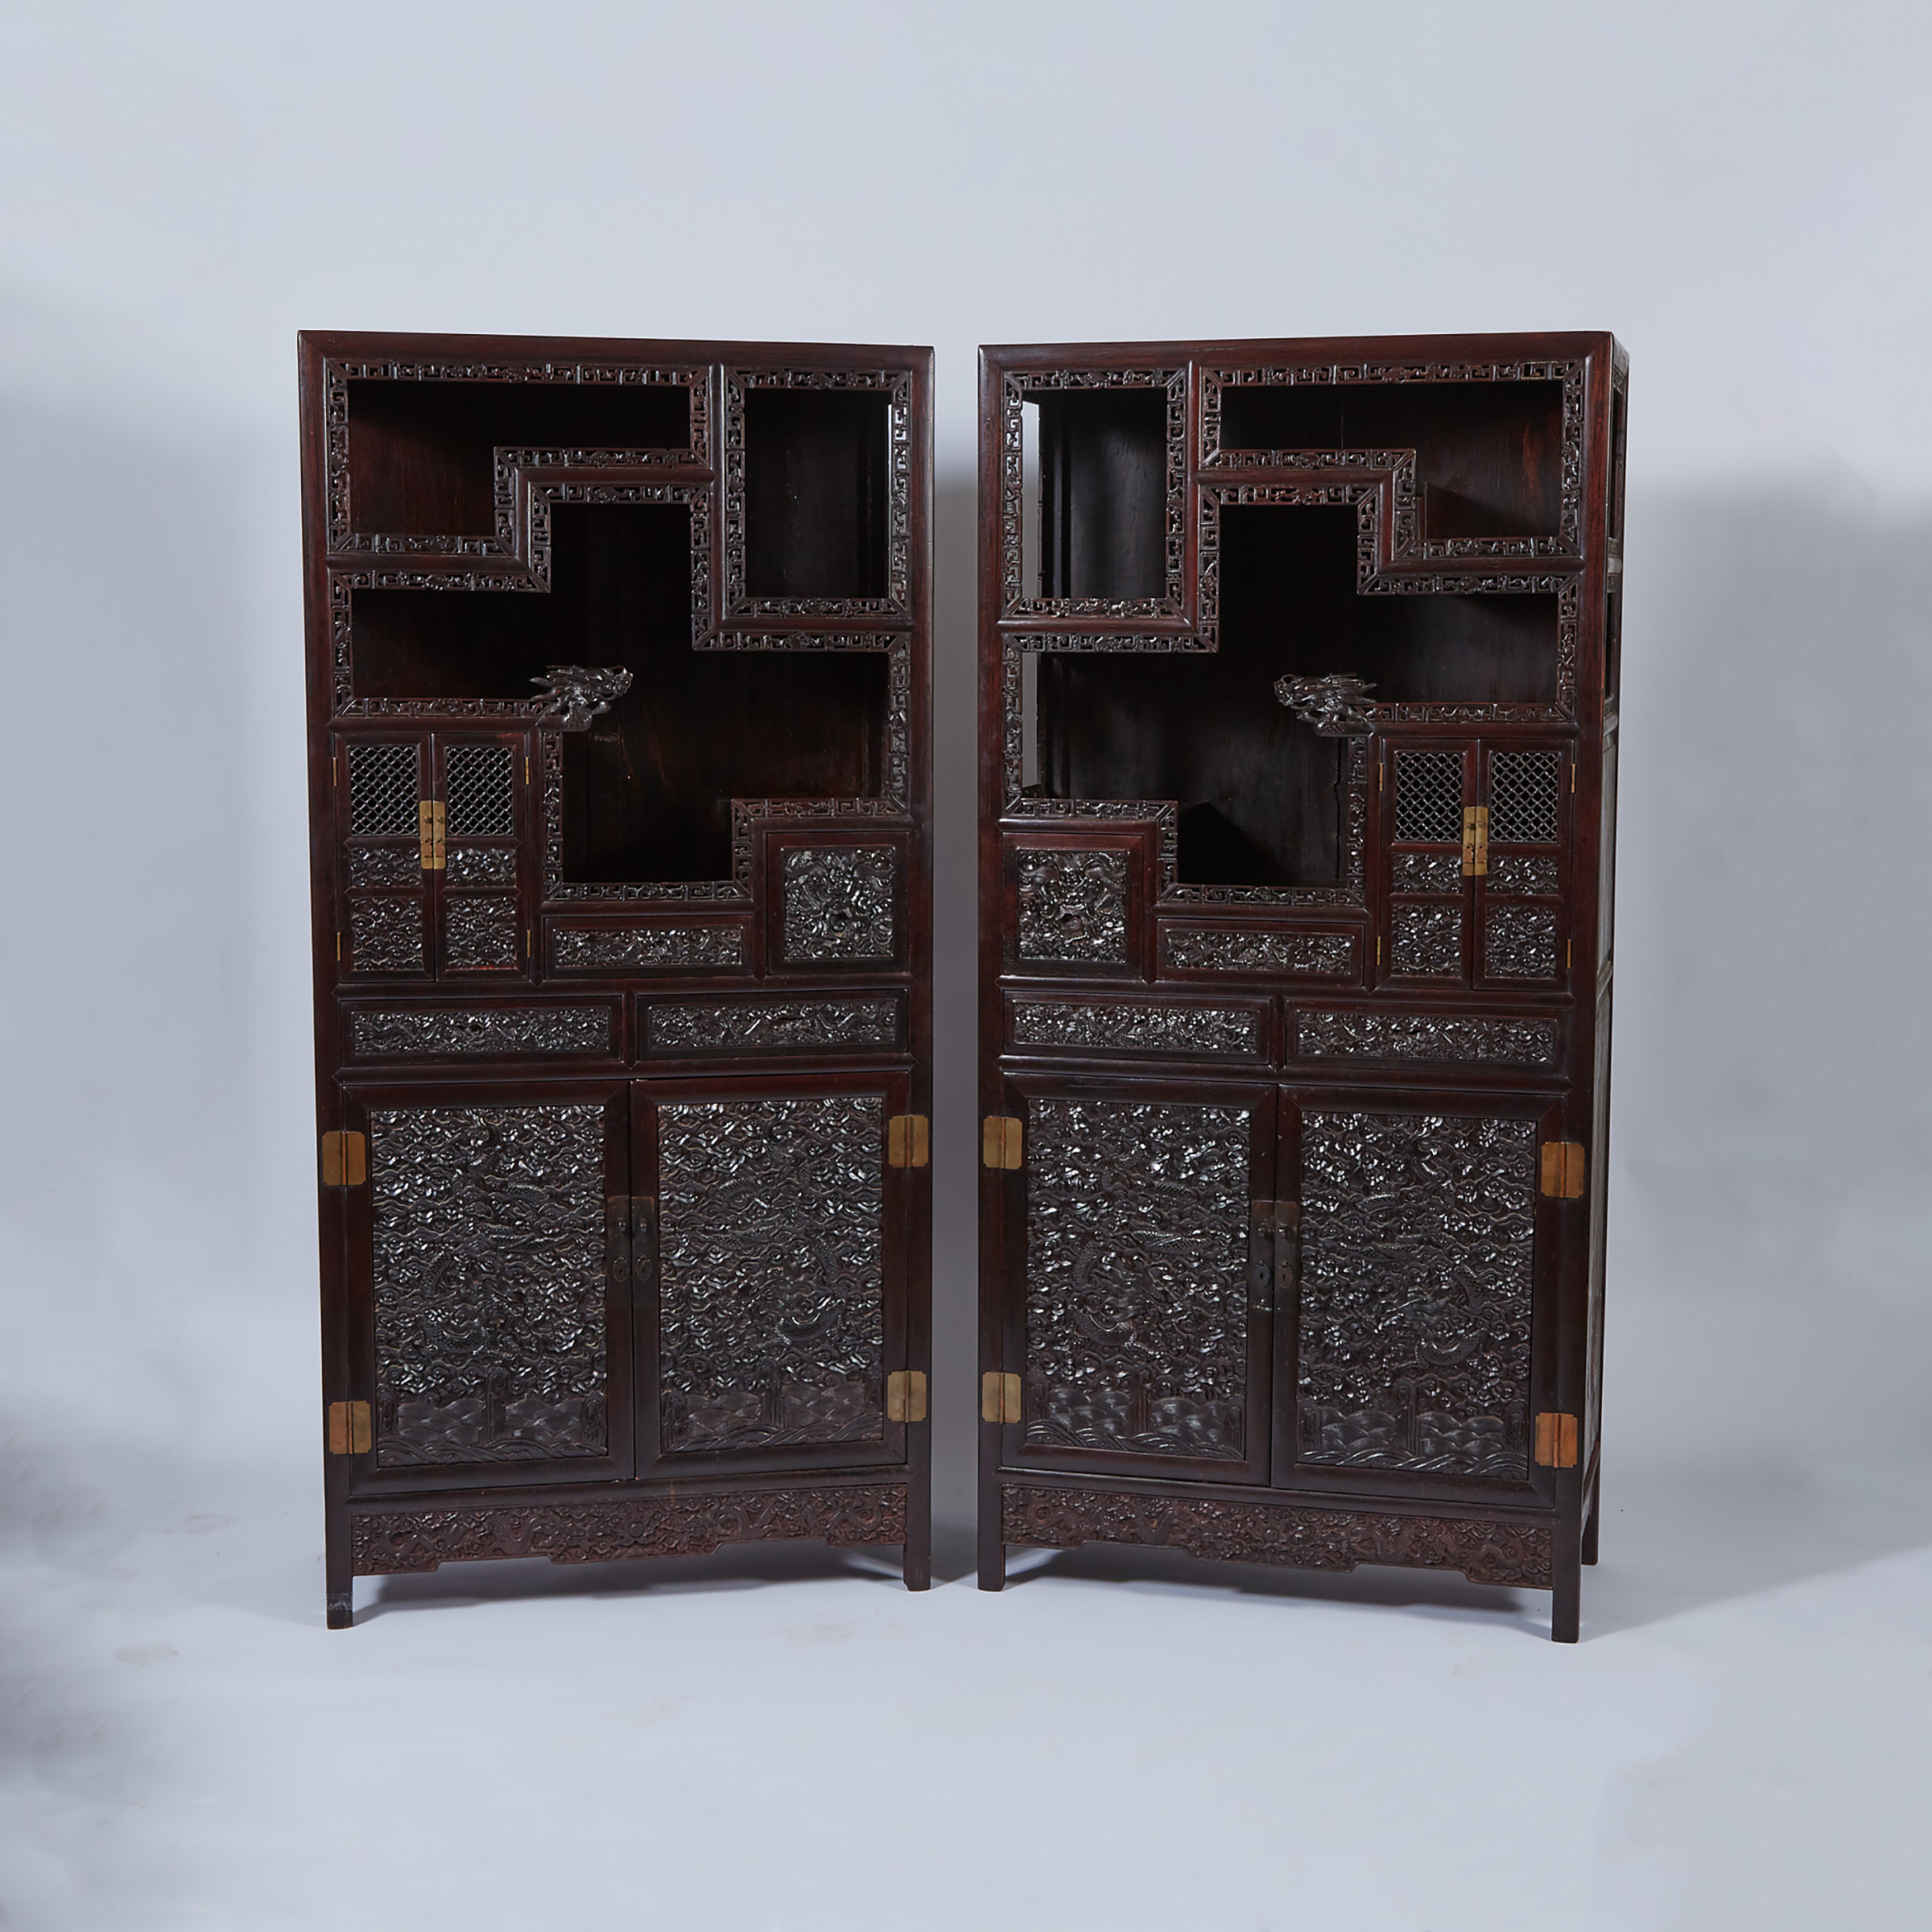 A Pair of Imperial Qing-Style Suanzhi Hardwood Carved Display Cabinets